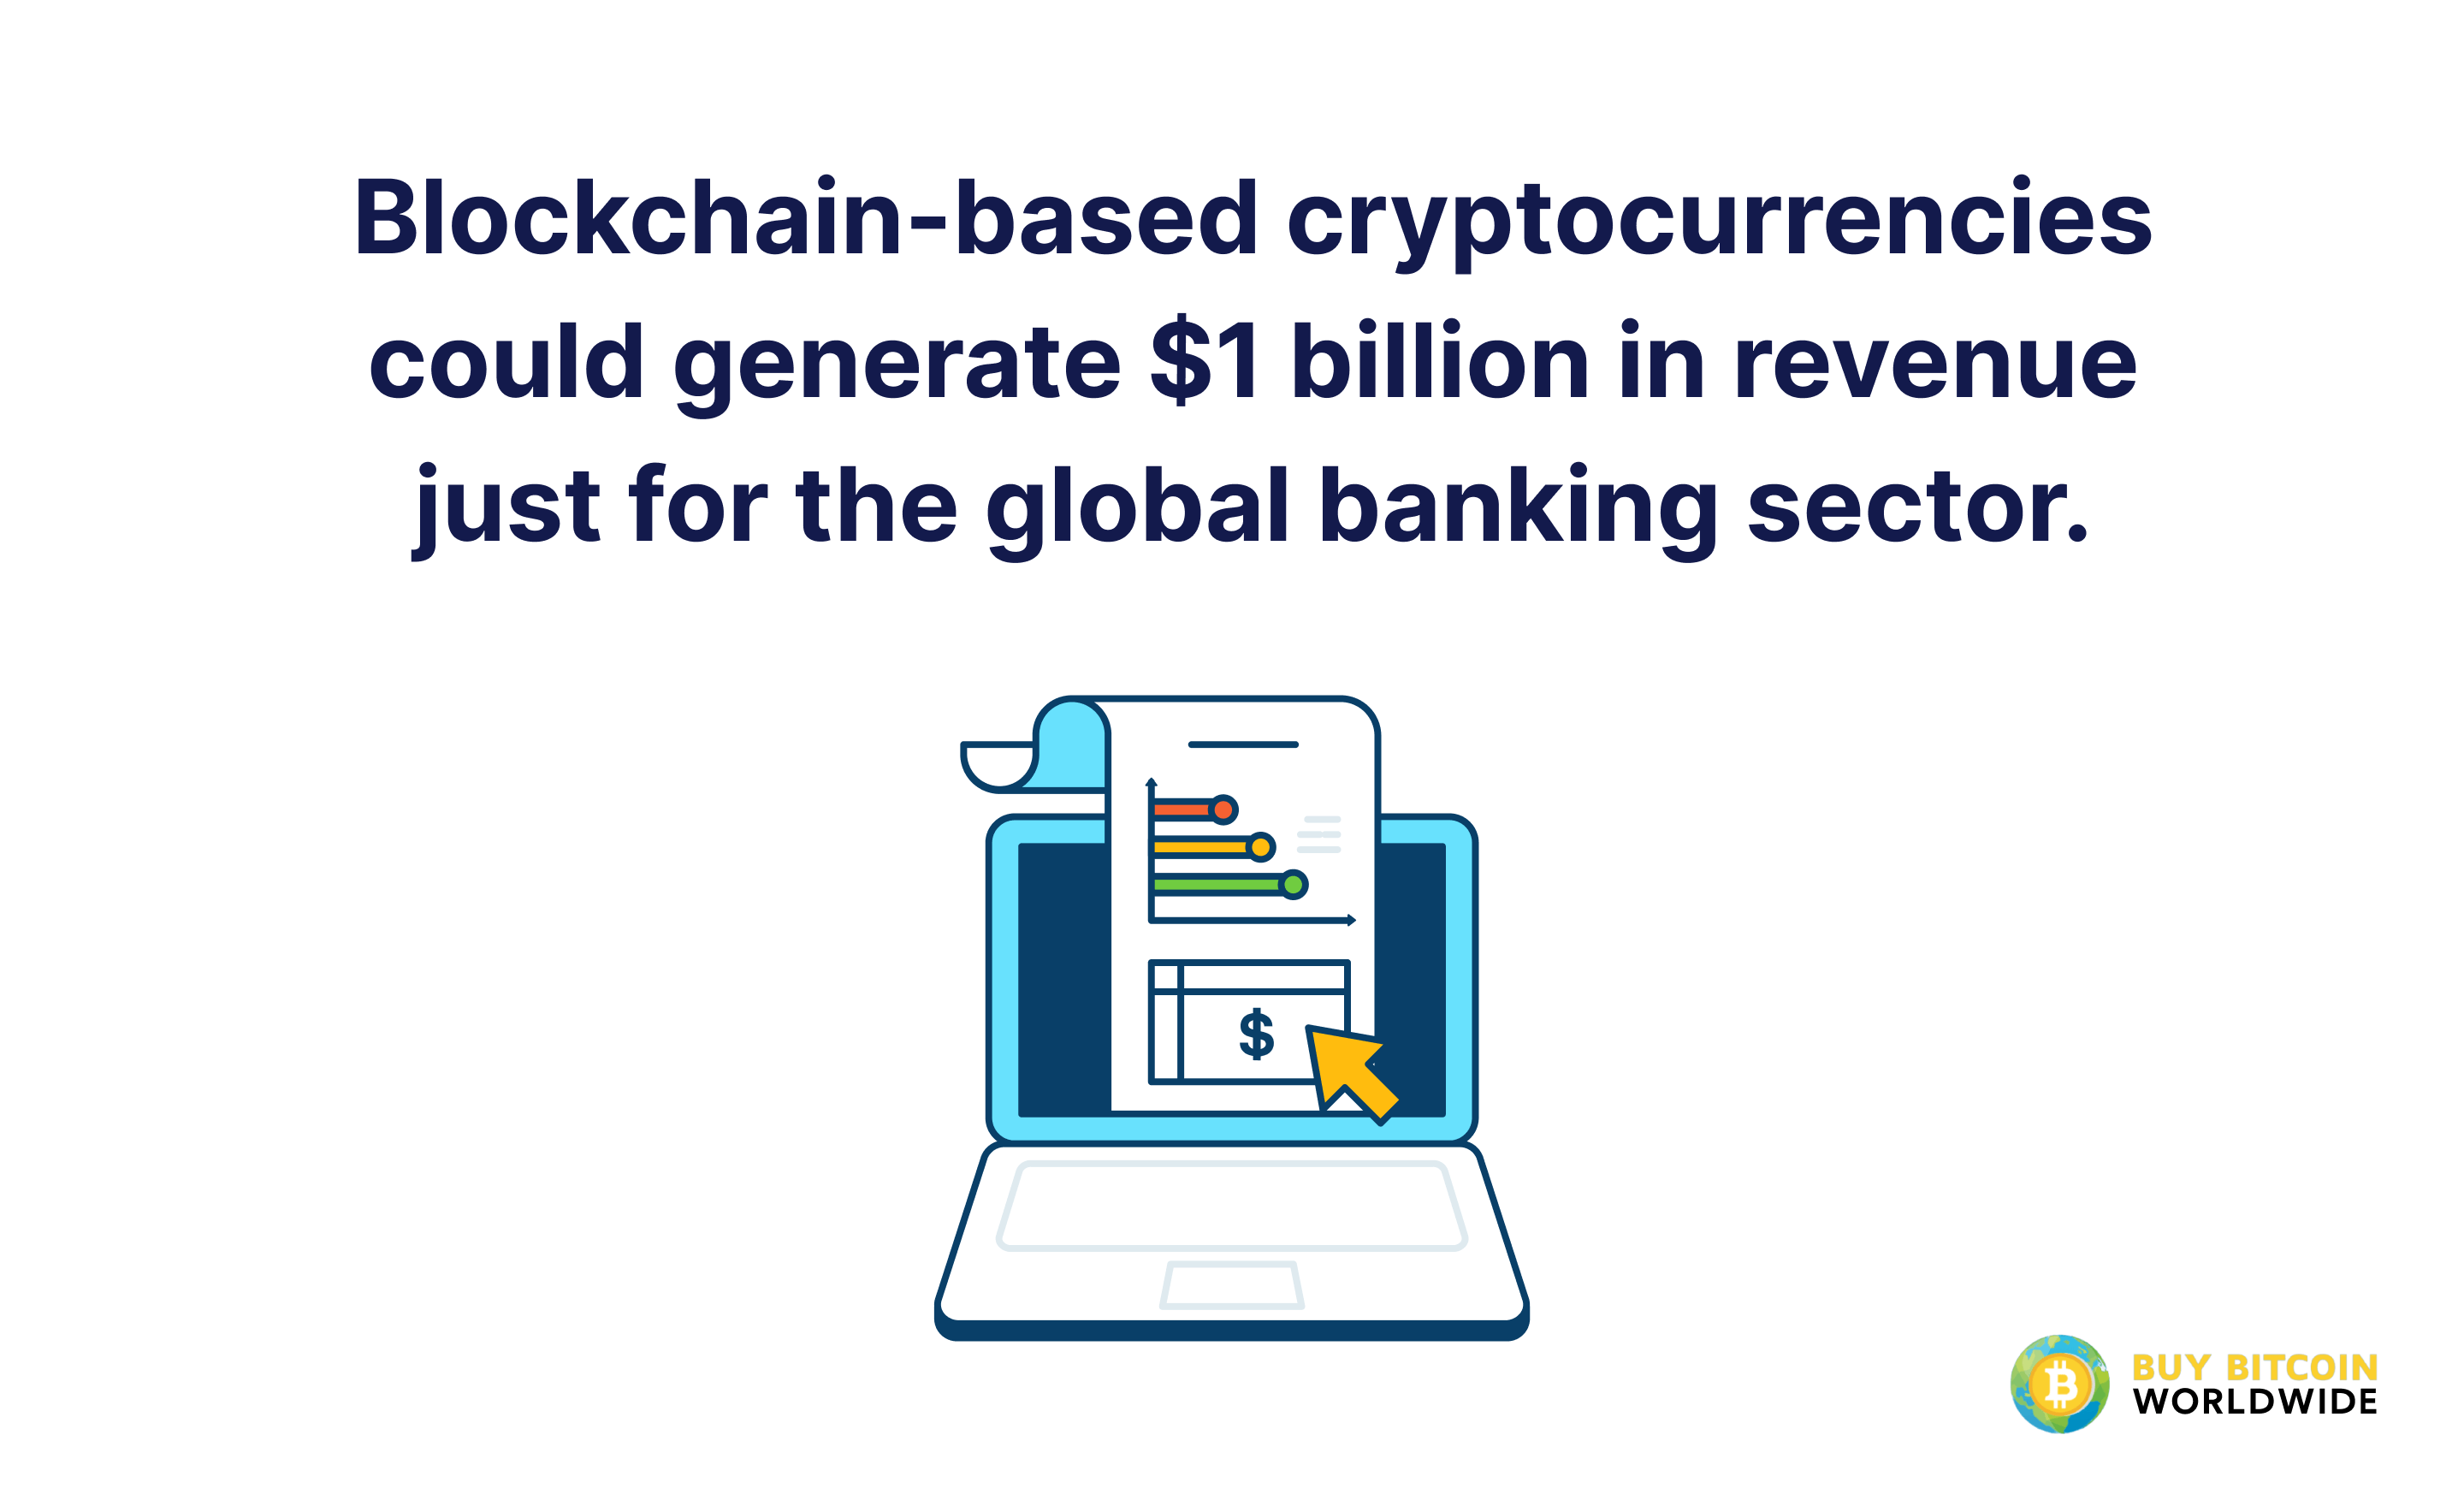 blockchain crypto could generate $1 billion in revenue for the global banking sector